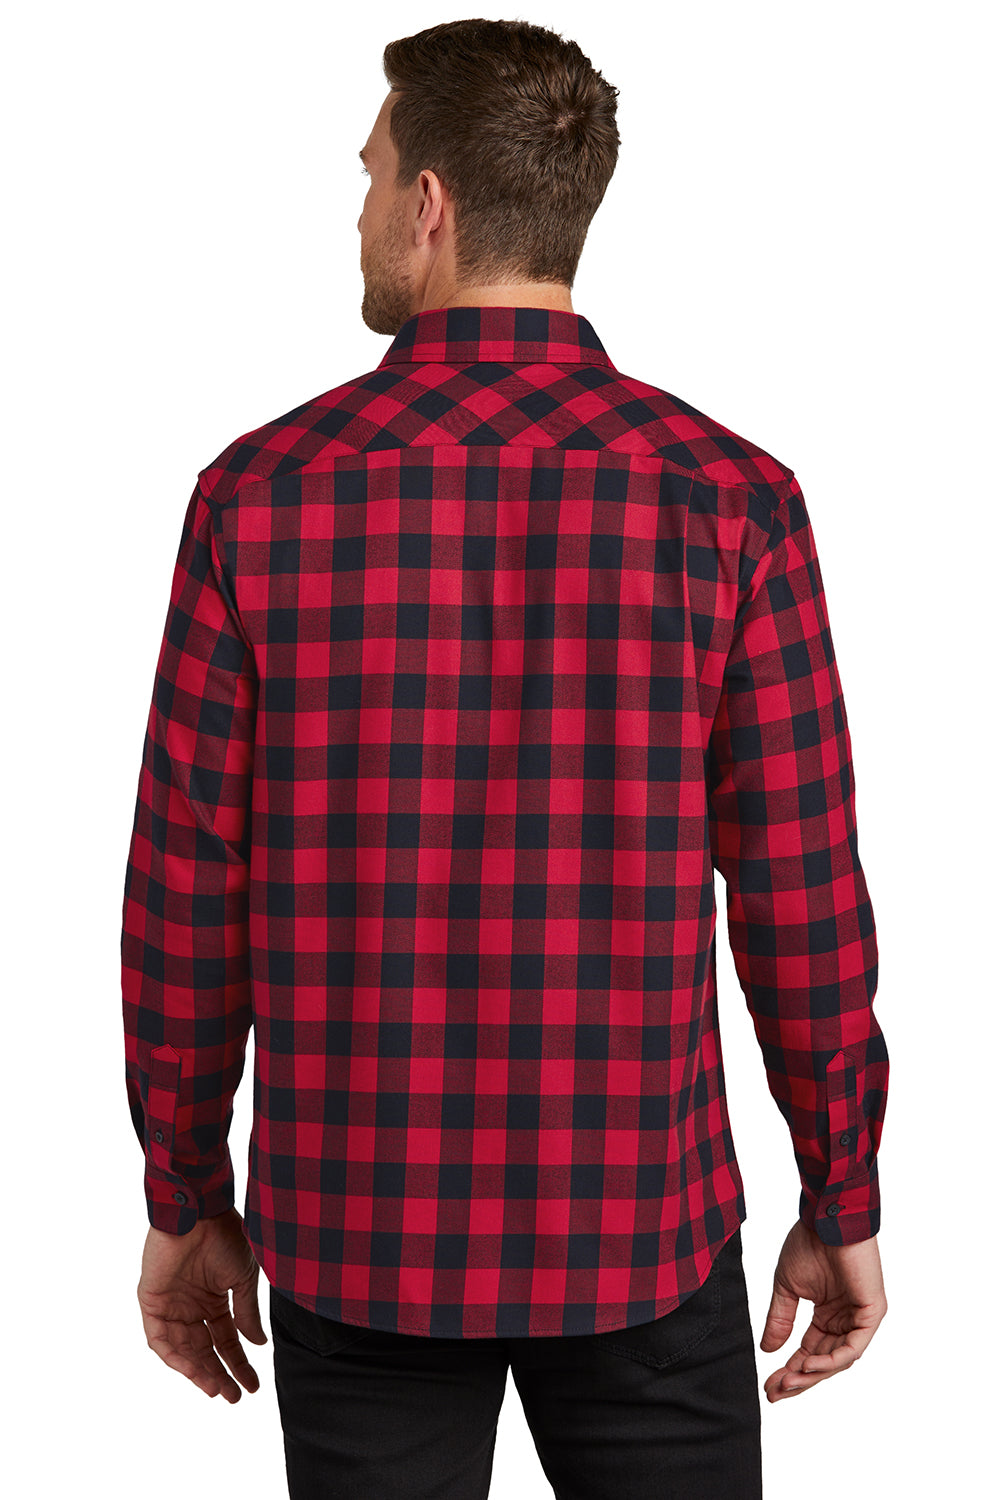 Port Authority W668 Mens Flannel Long Sleeve Button Down Shirt w/ Double Pockets Red/Black Buffalo Back